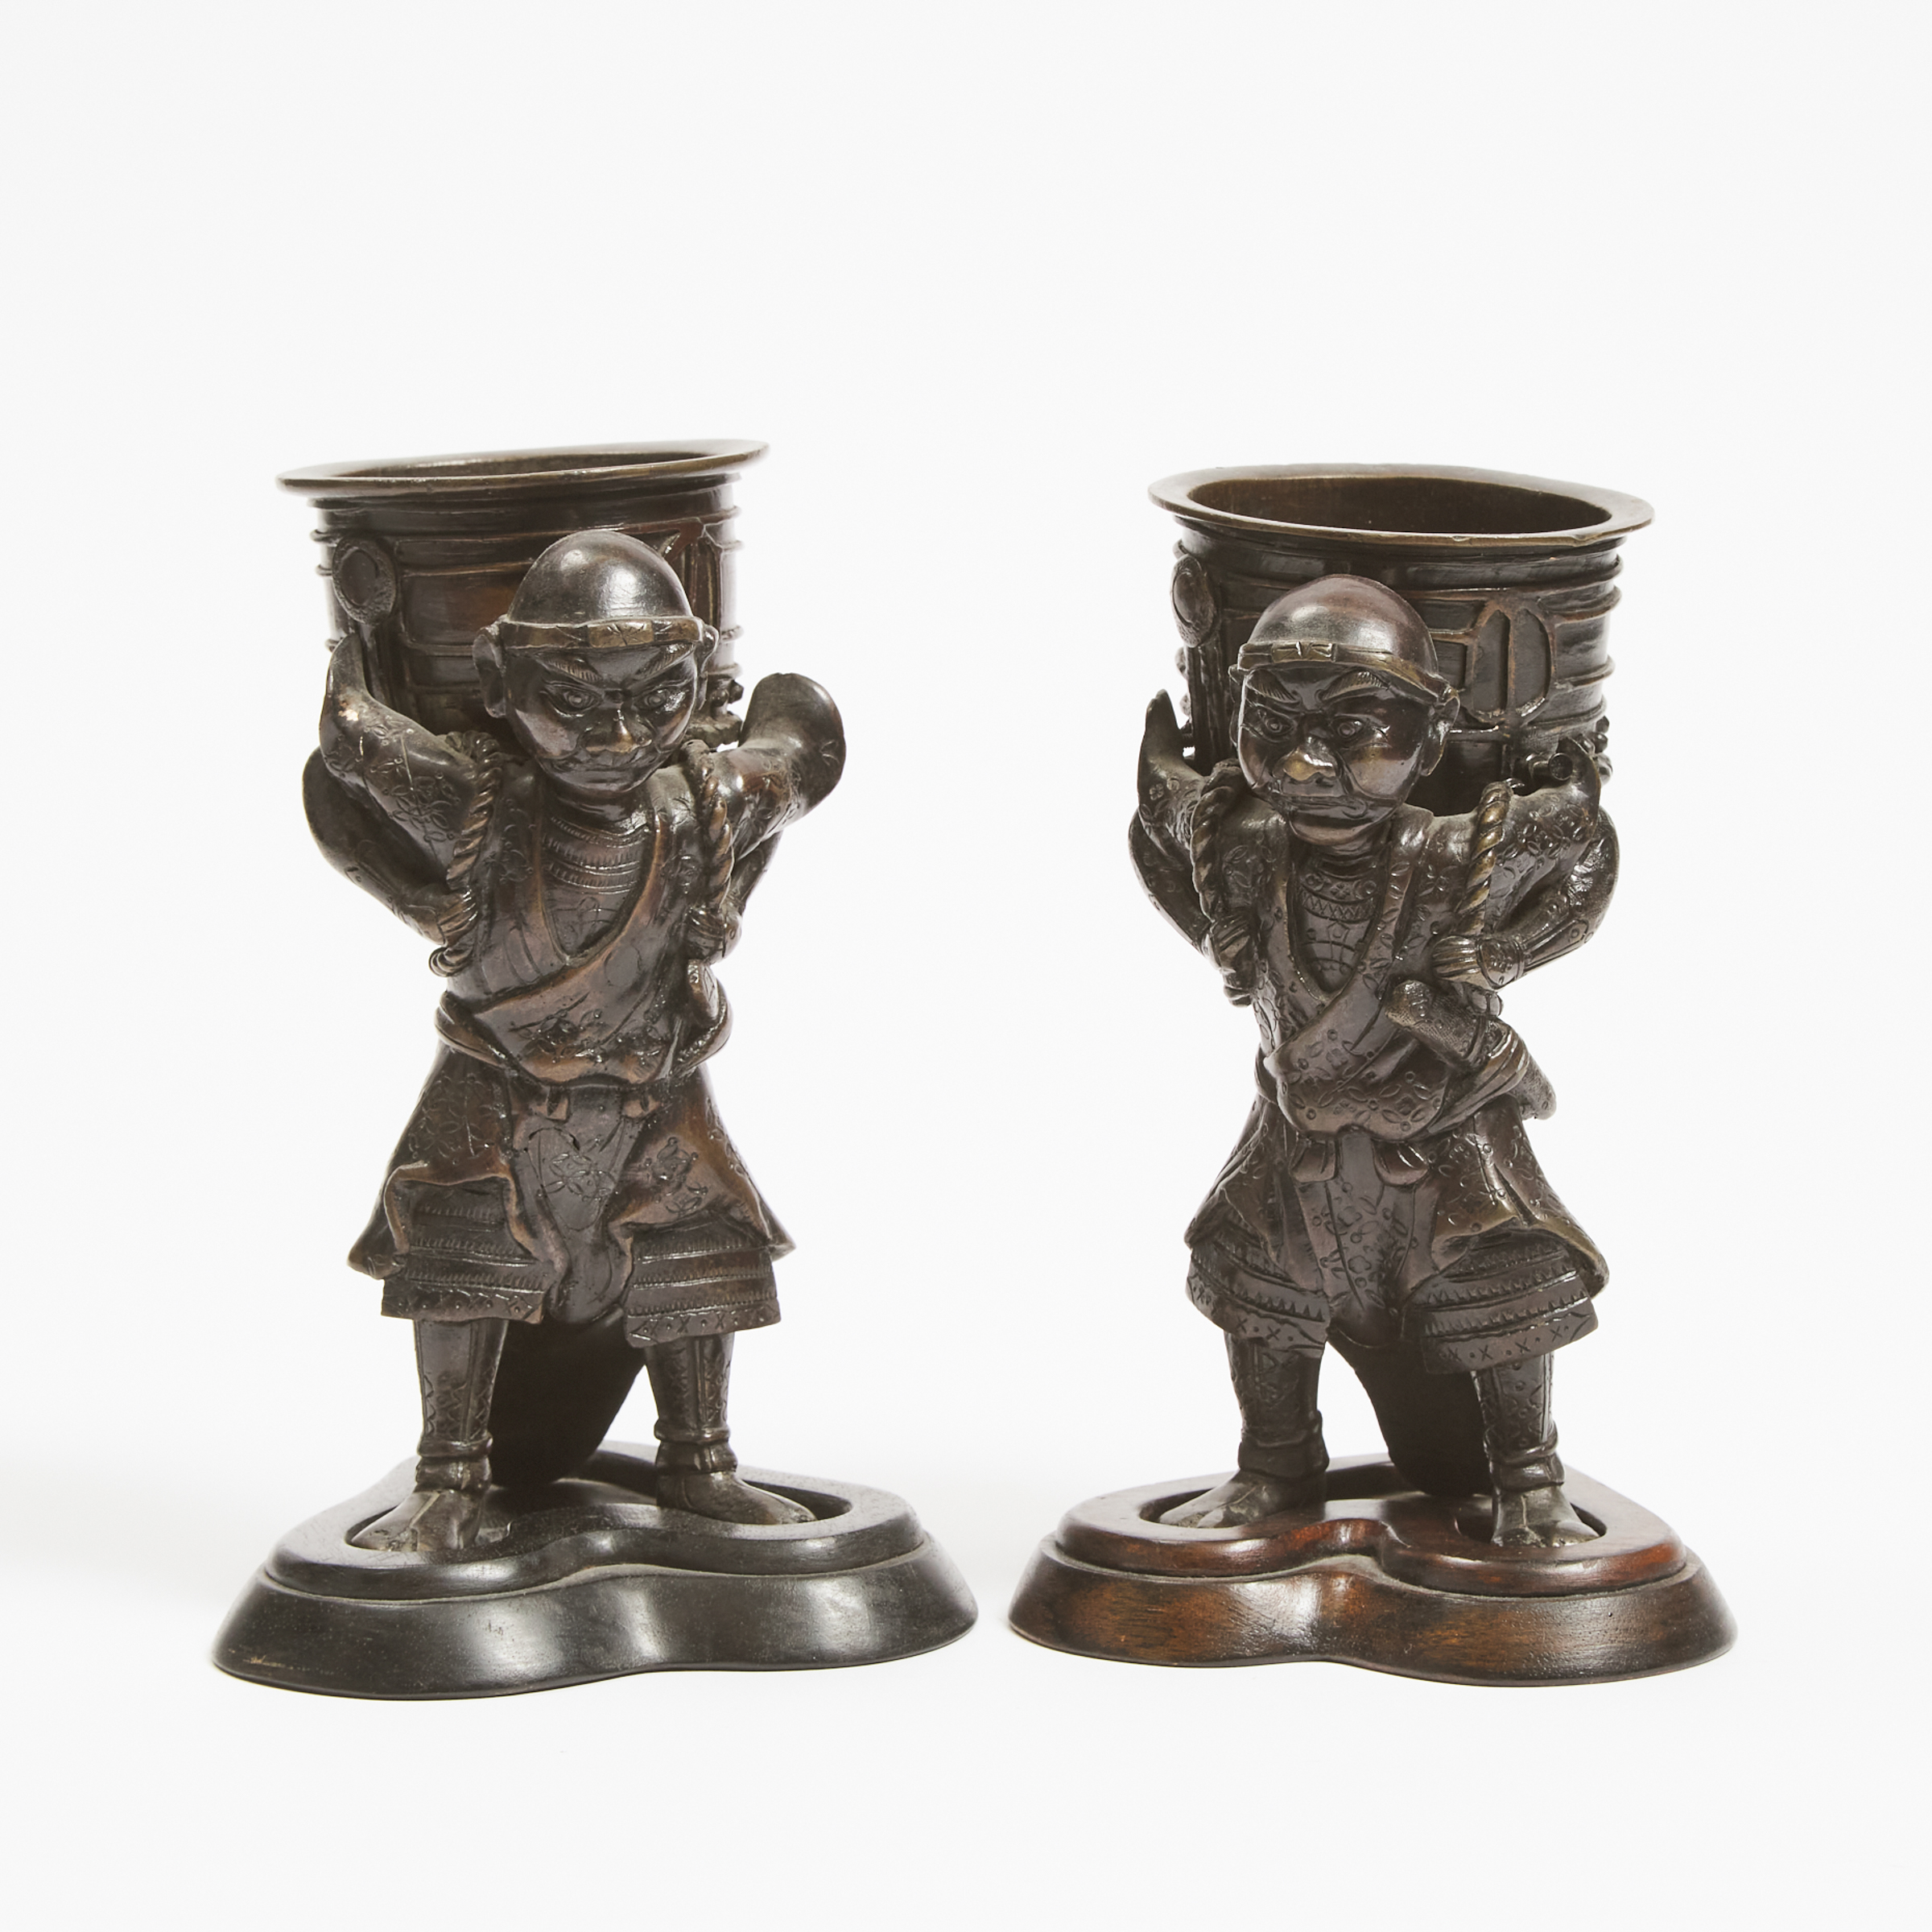 A Pair of Bronze Okimono Figures Carrying Temple Bells, Meiji Period (1868-1912)